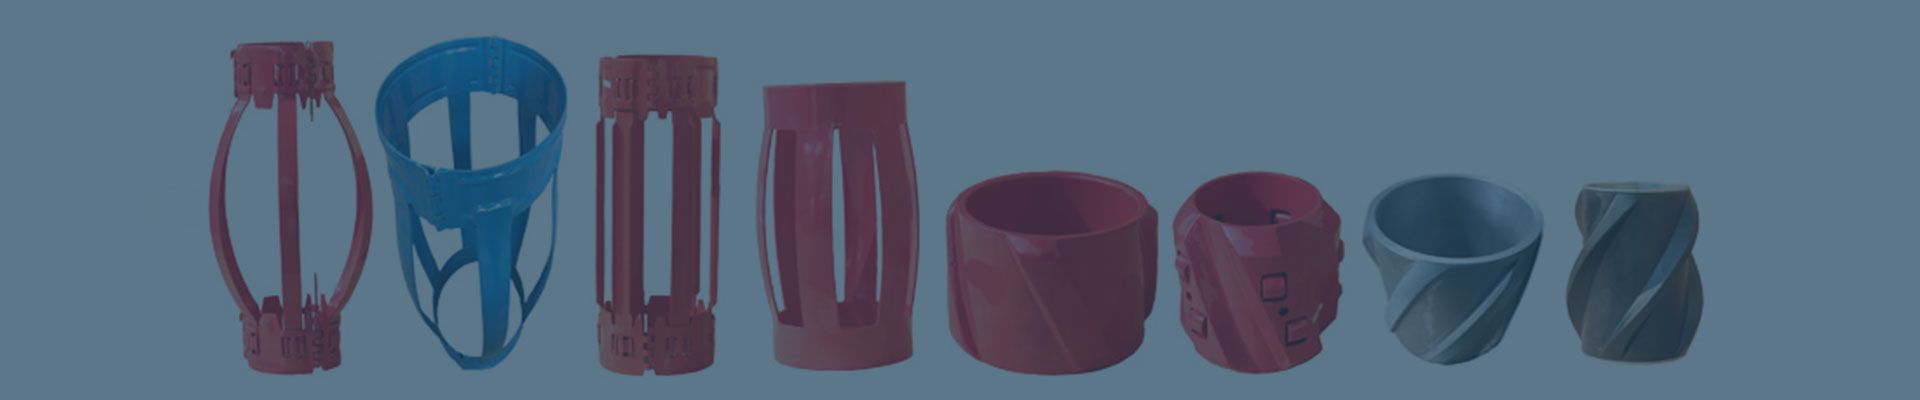 CENTRALIZER